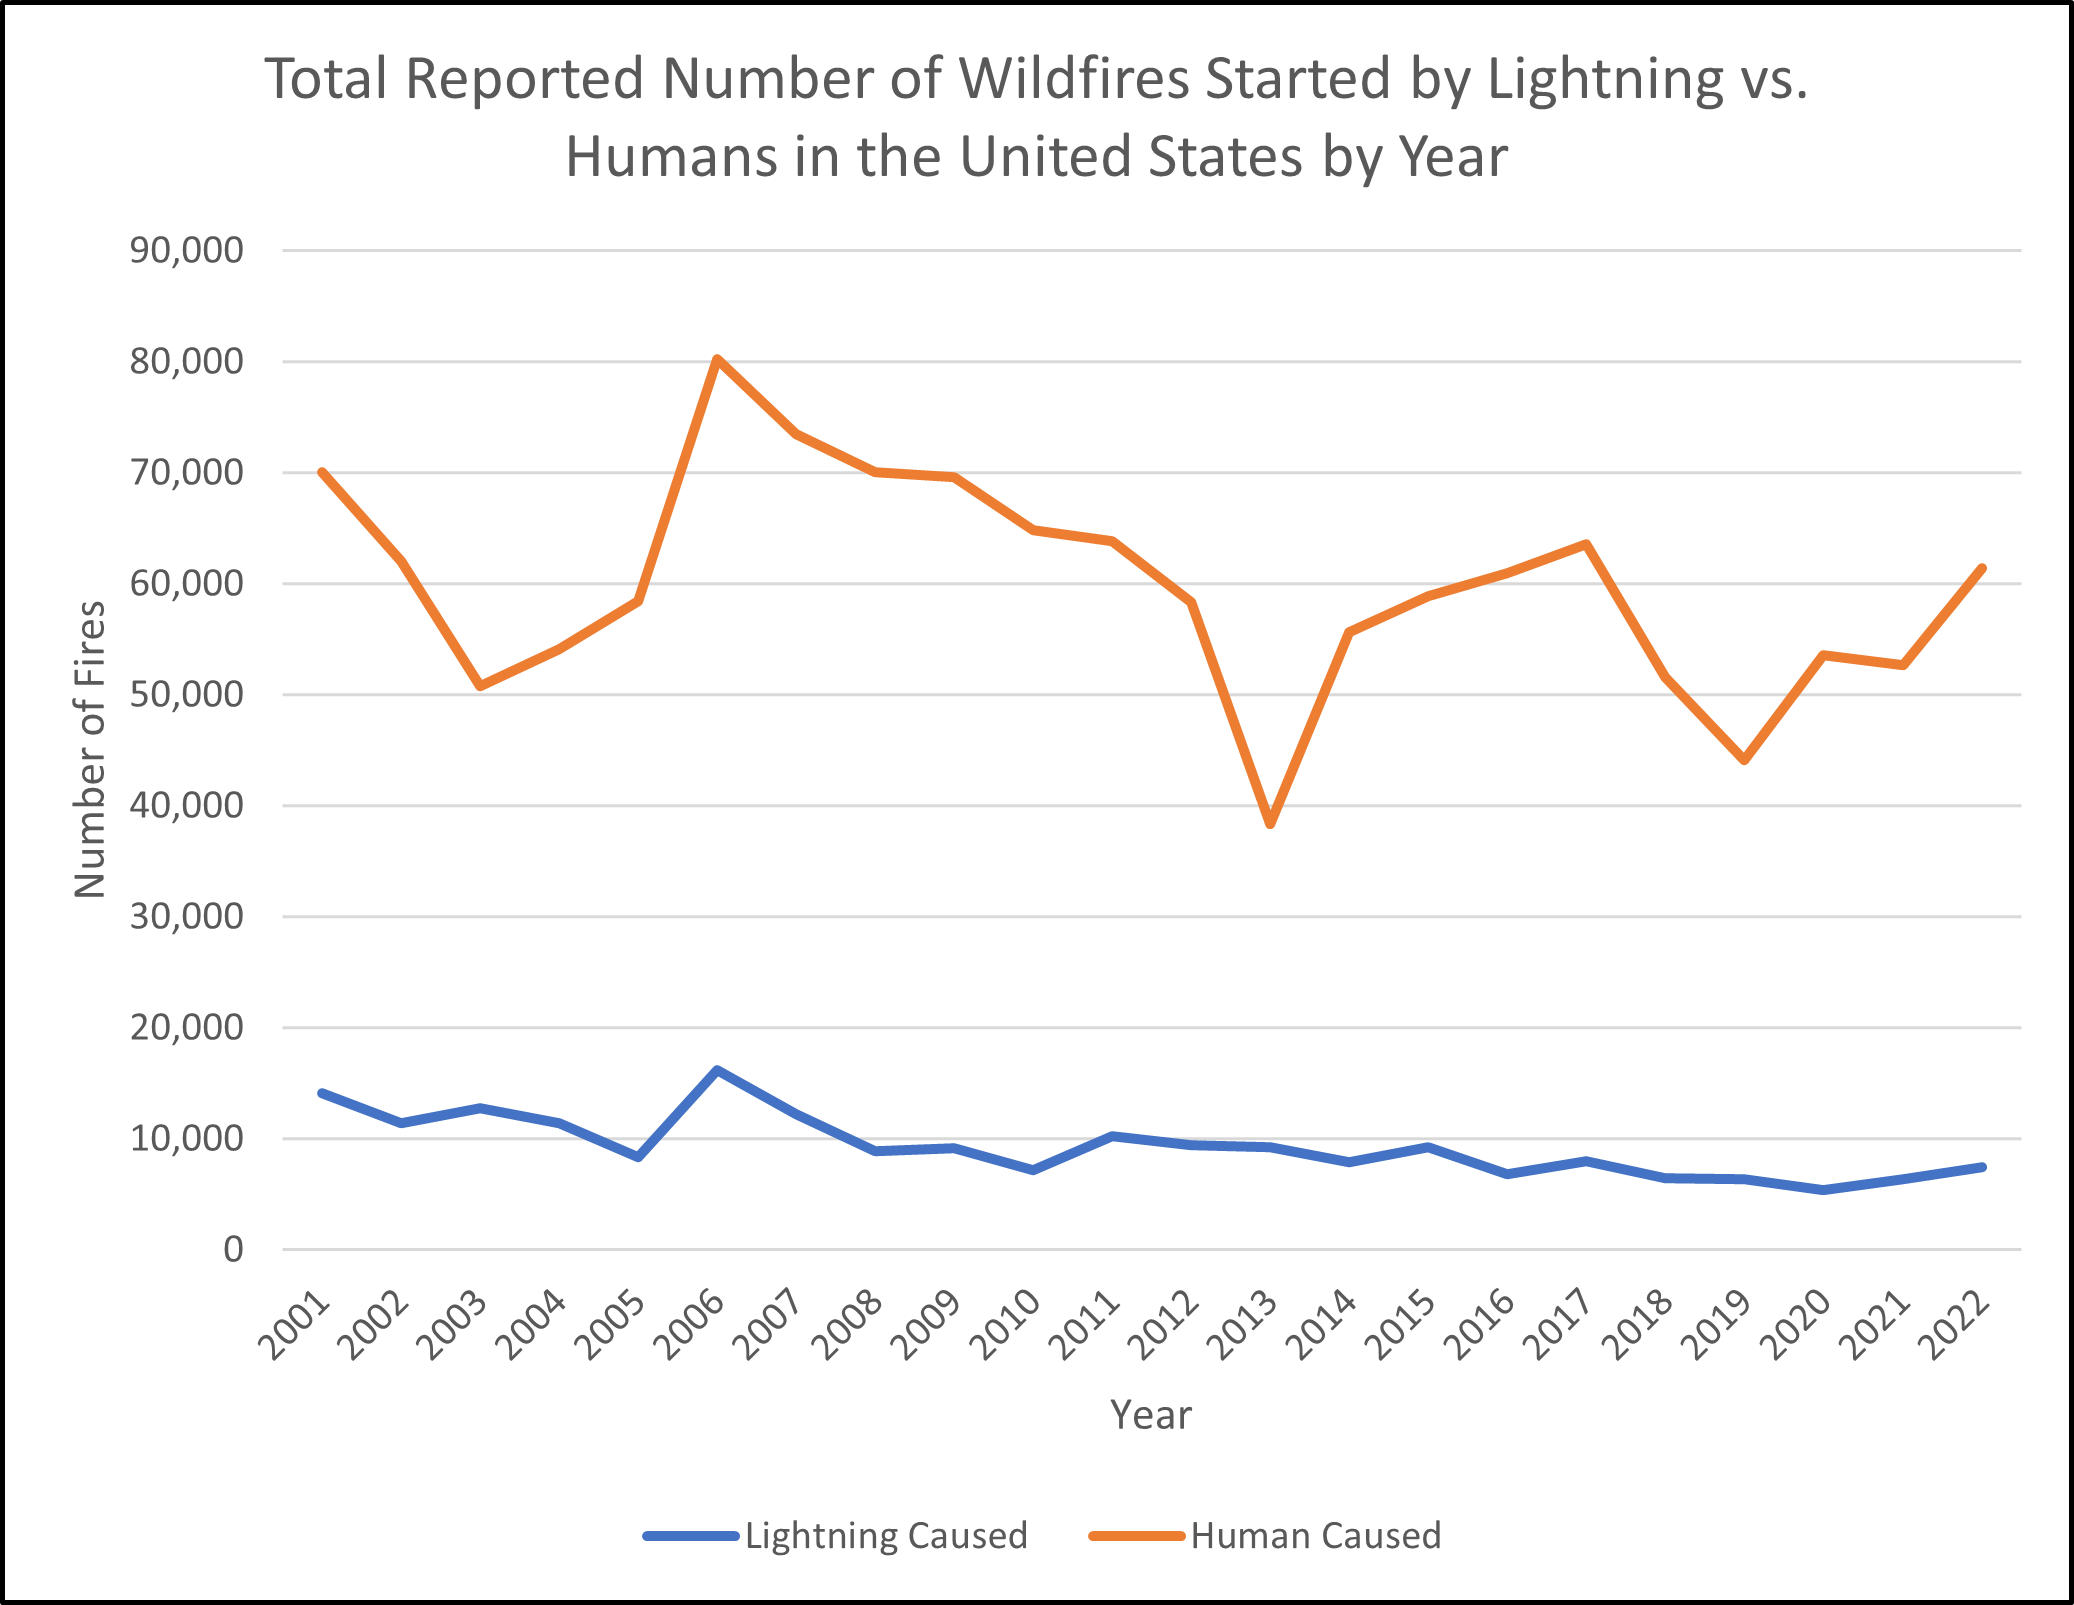 Graph showing the total reported wildfires started by lightning vs humans in the United States between 2001 and 2022. Humans started more fires every year compared to lightning fires.